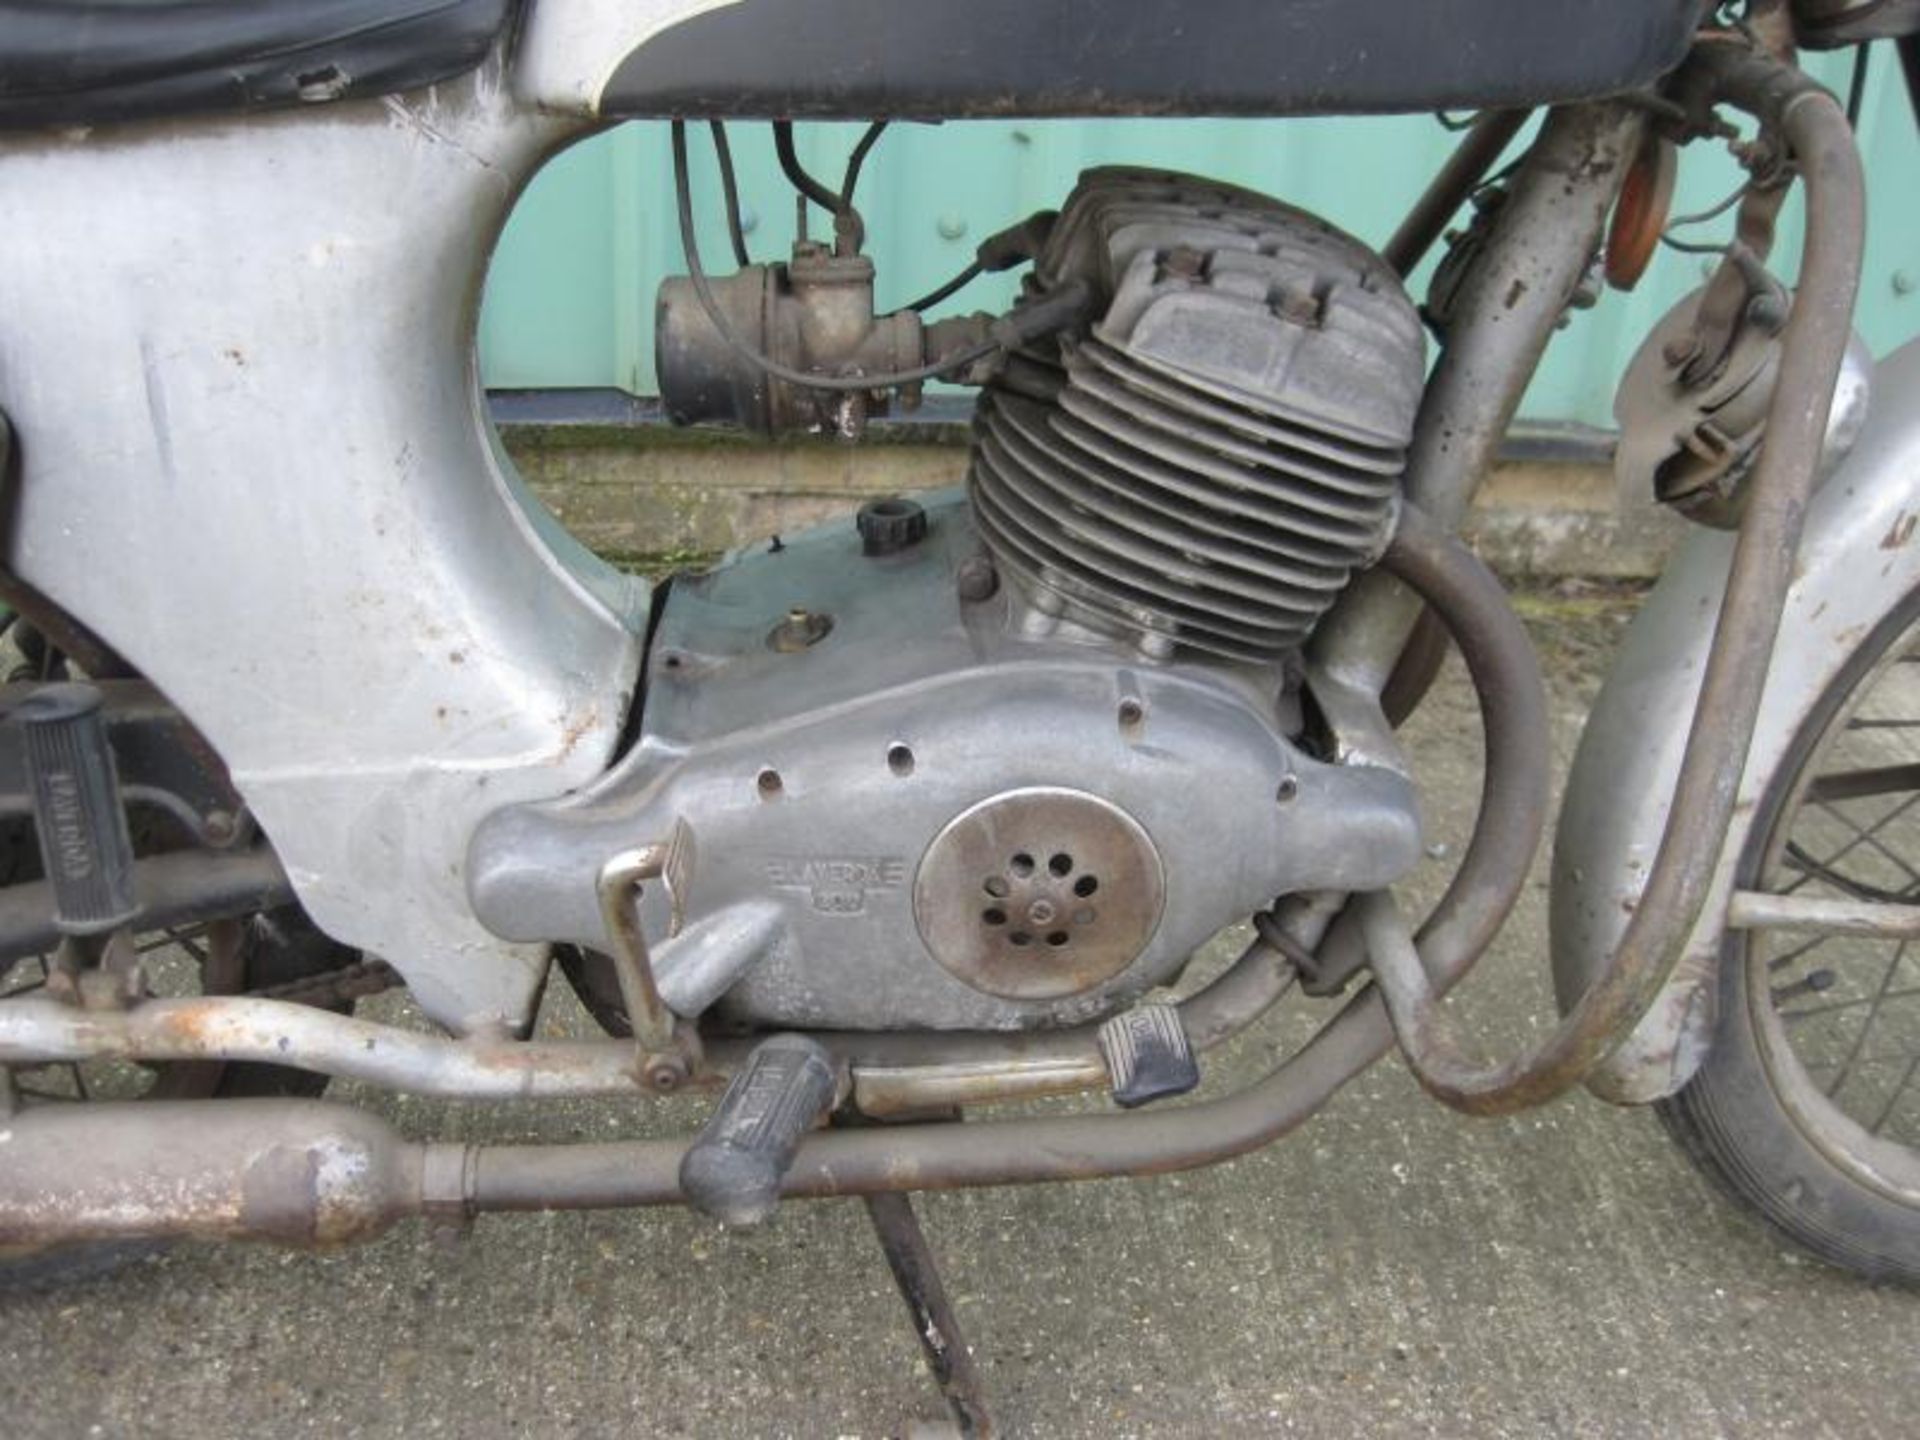 1967 200cc Laverda 200 Twin Reg. No. N/A Frame No. 0602 Engine No. Not found An uncommon example - Image 3 of 9